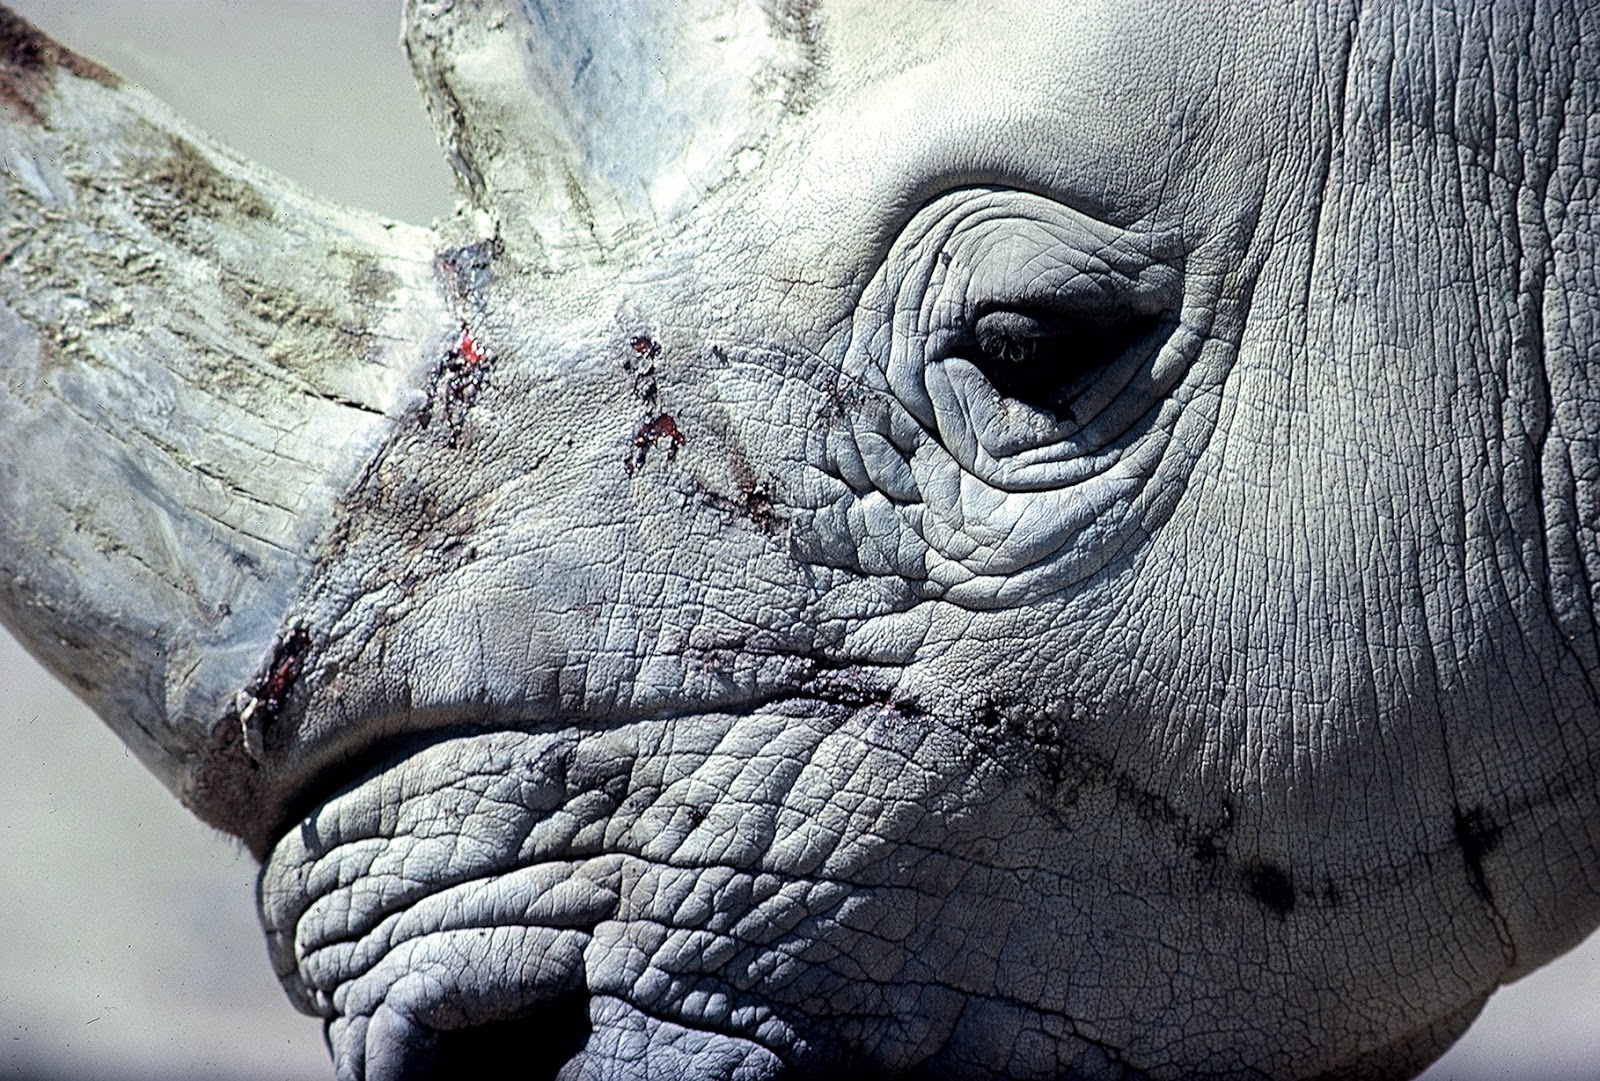 Rhino HD Wallpapers | HD Wallpapers High Definition | 100% Quality HD ...